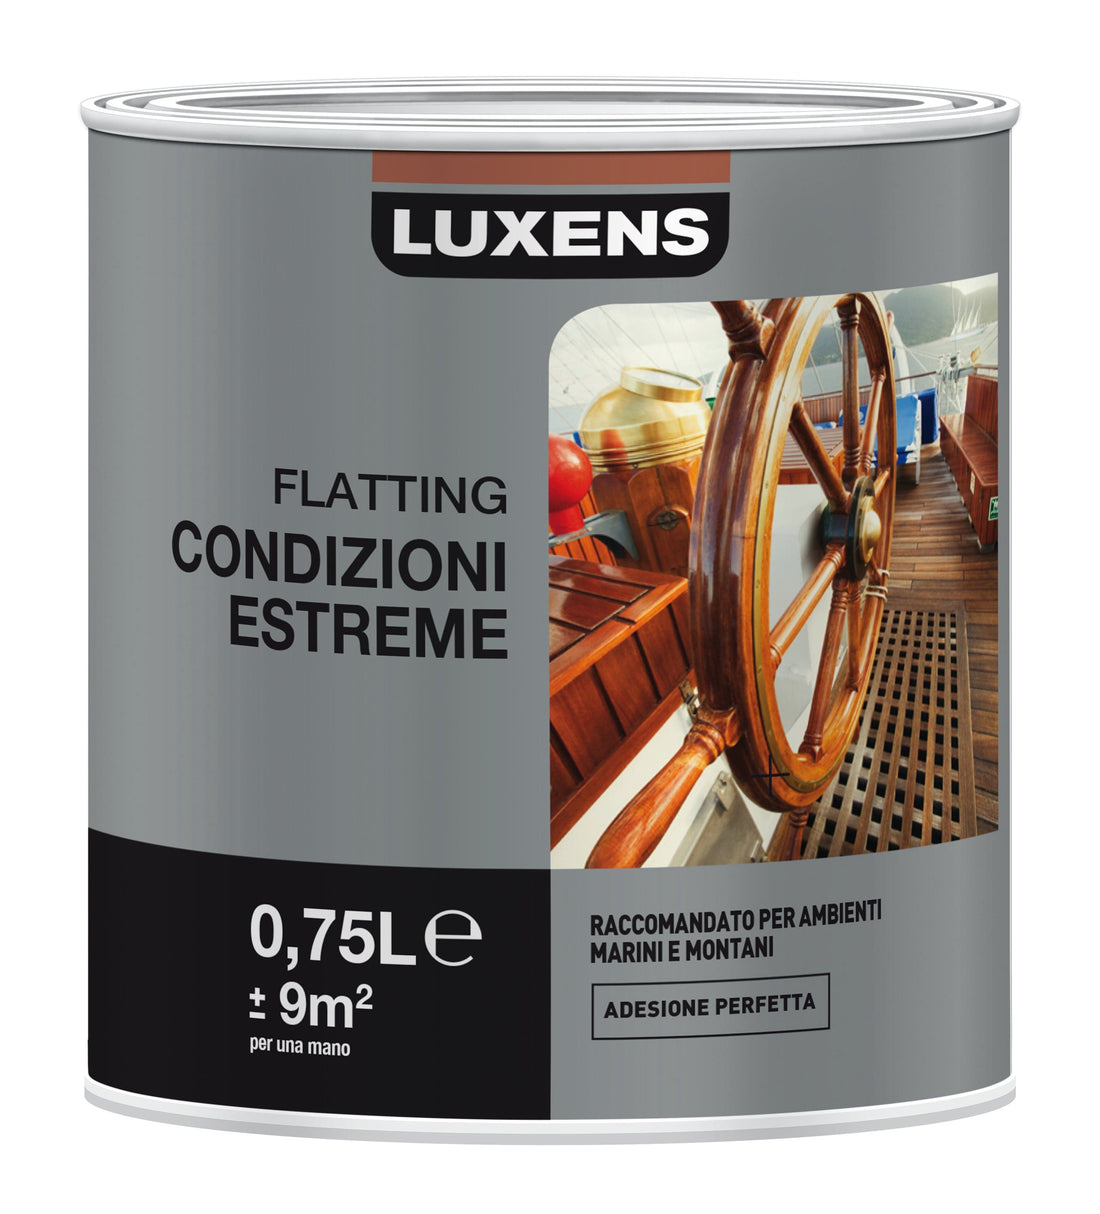 SOLVENT-BASED EXTREME CLIMATE FLATTING 750ML LUXENS - best price from Maltashopper.com BR470001905